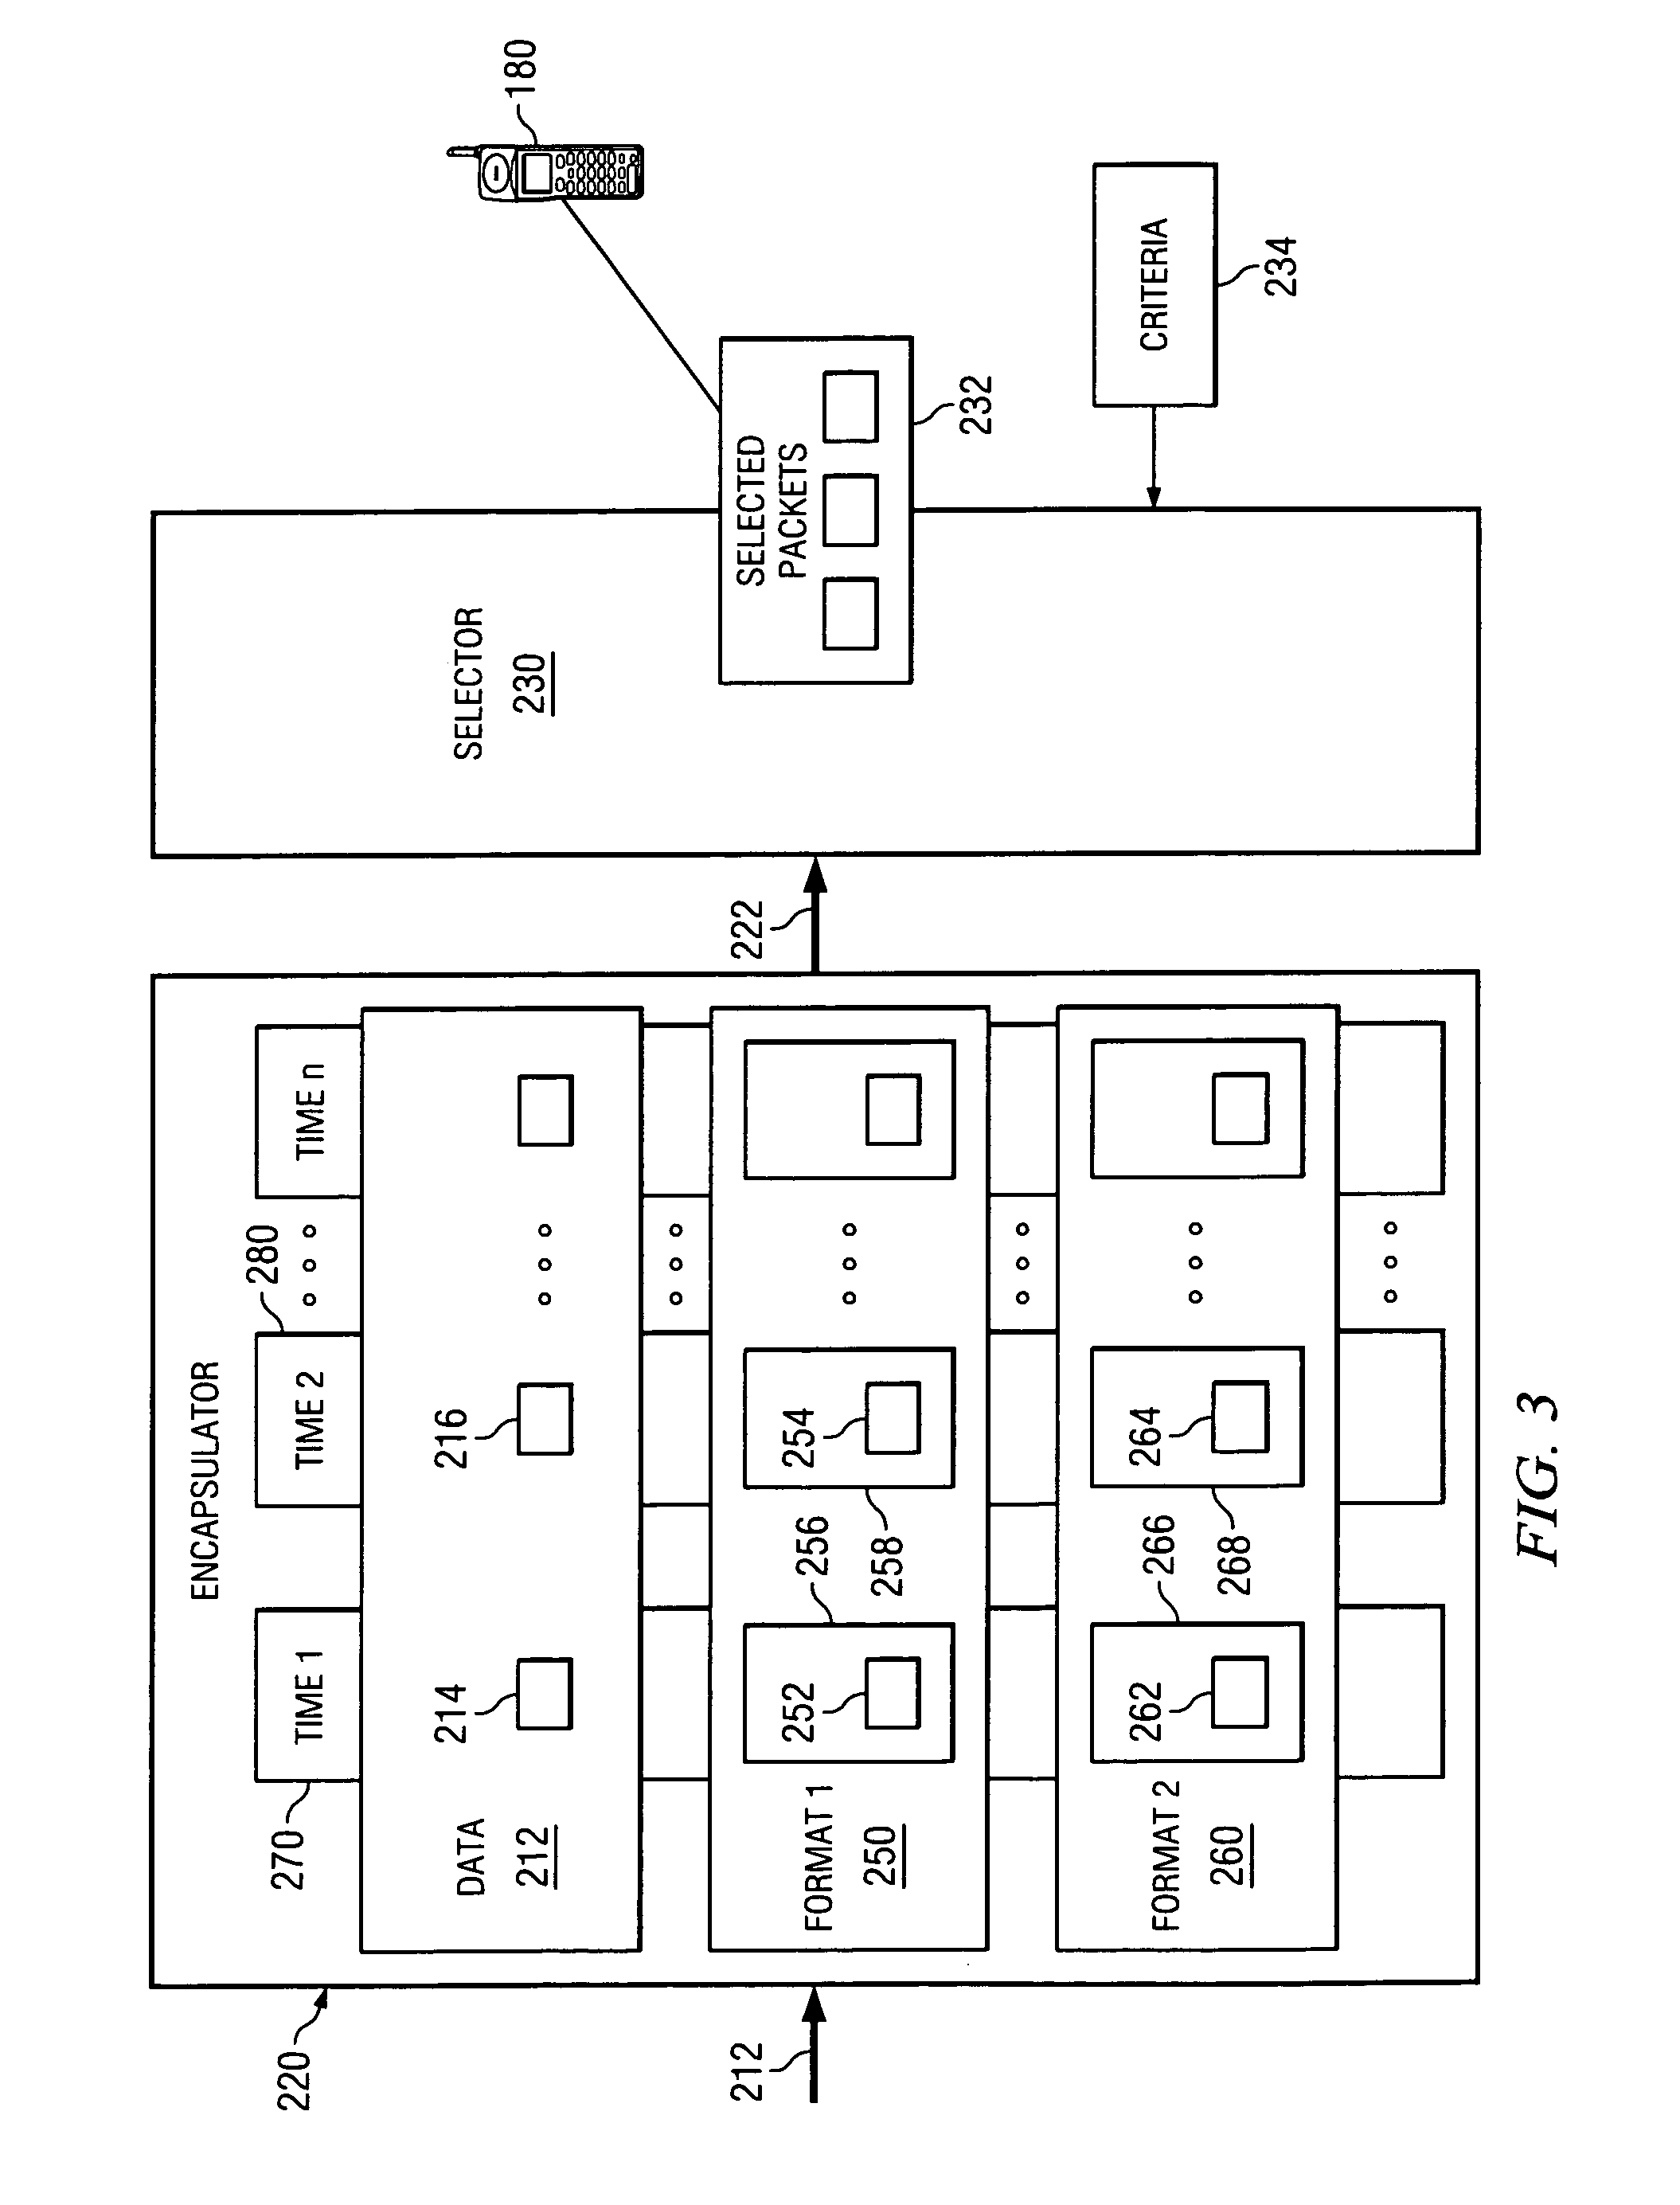 System and method for location based interaction with a device